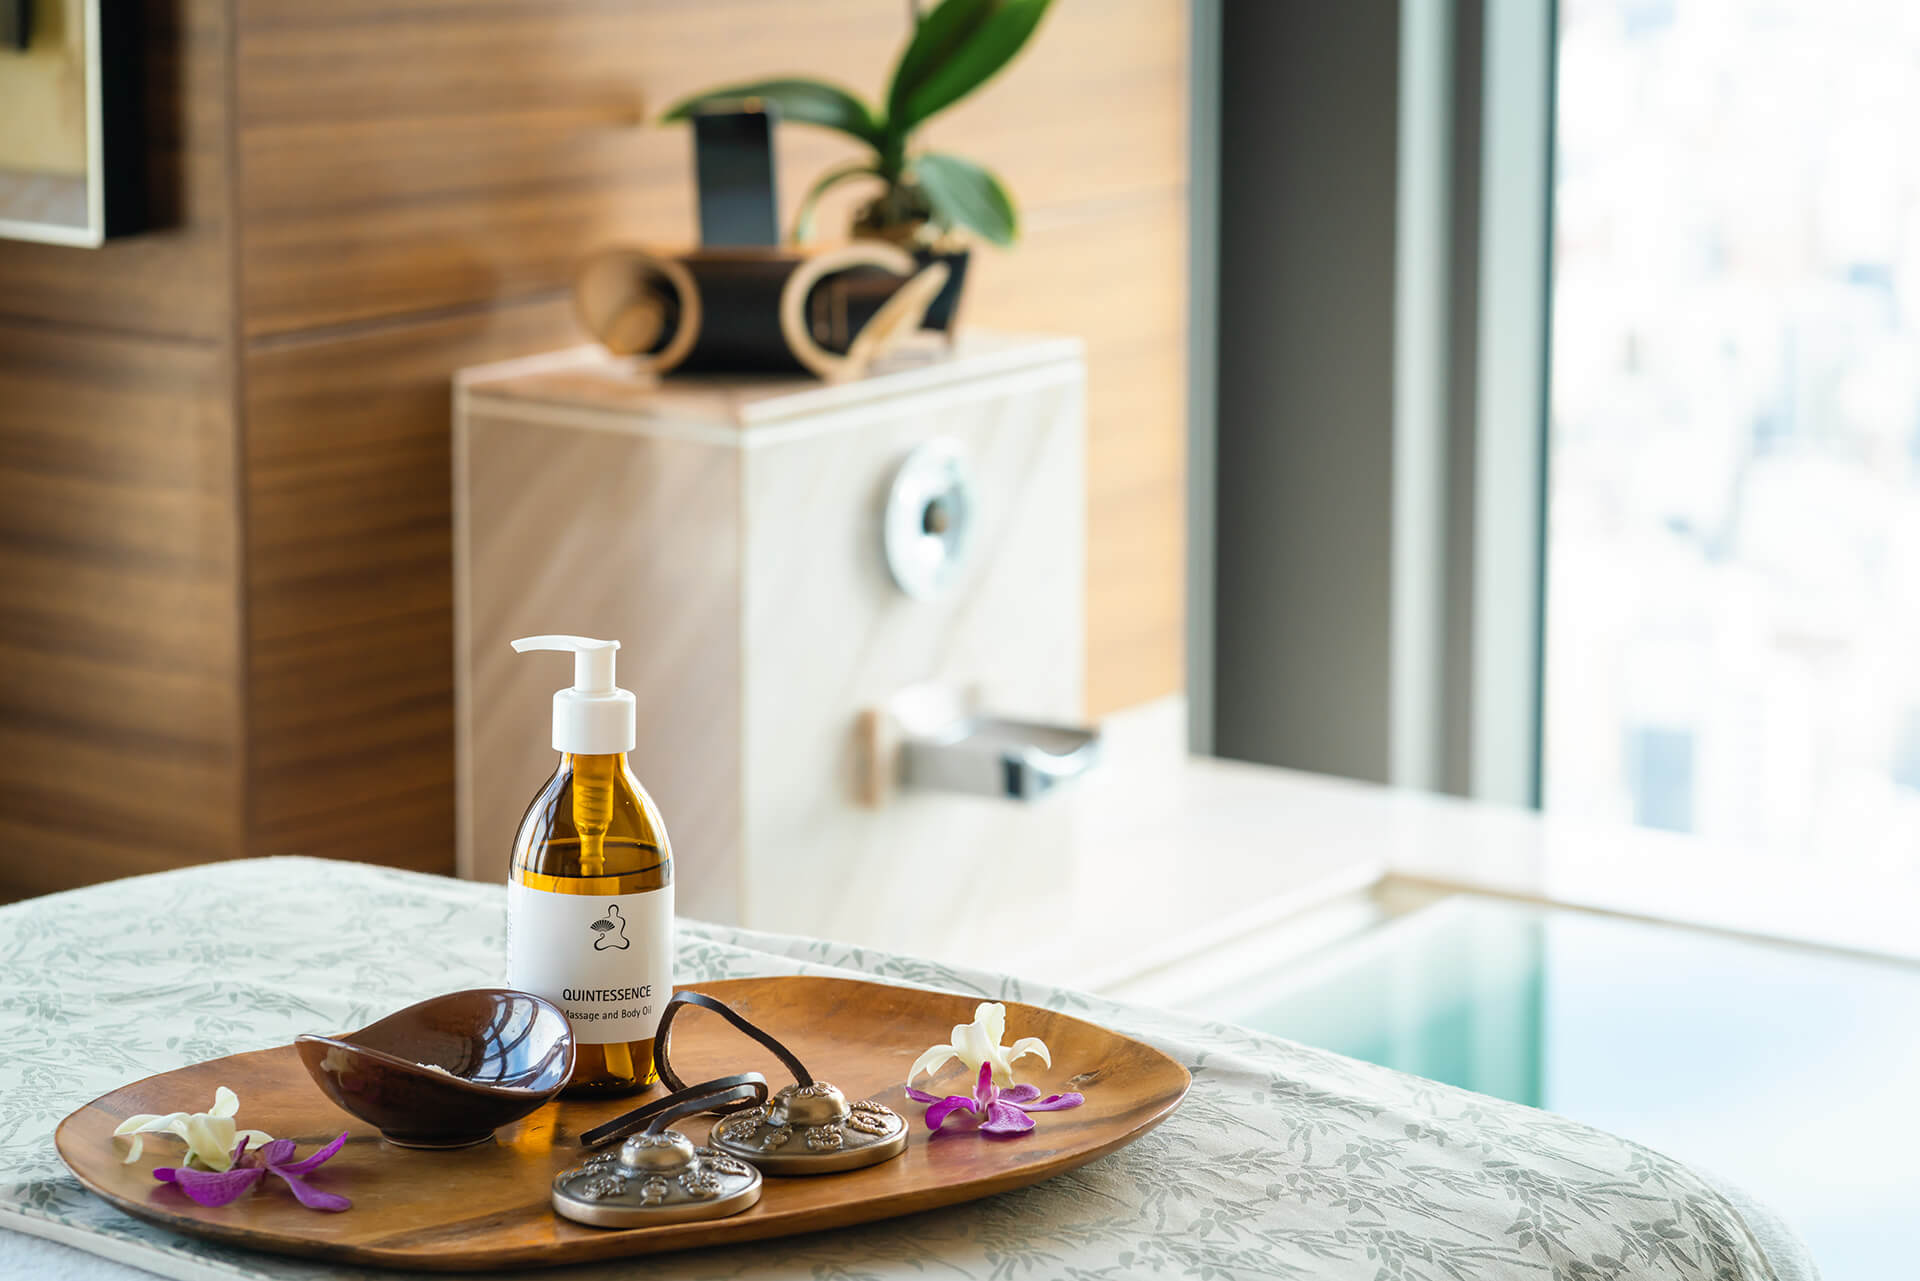 Aroma will aid relaxation at Mandarin Oriental Spa.